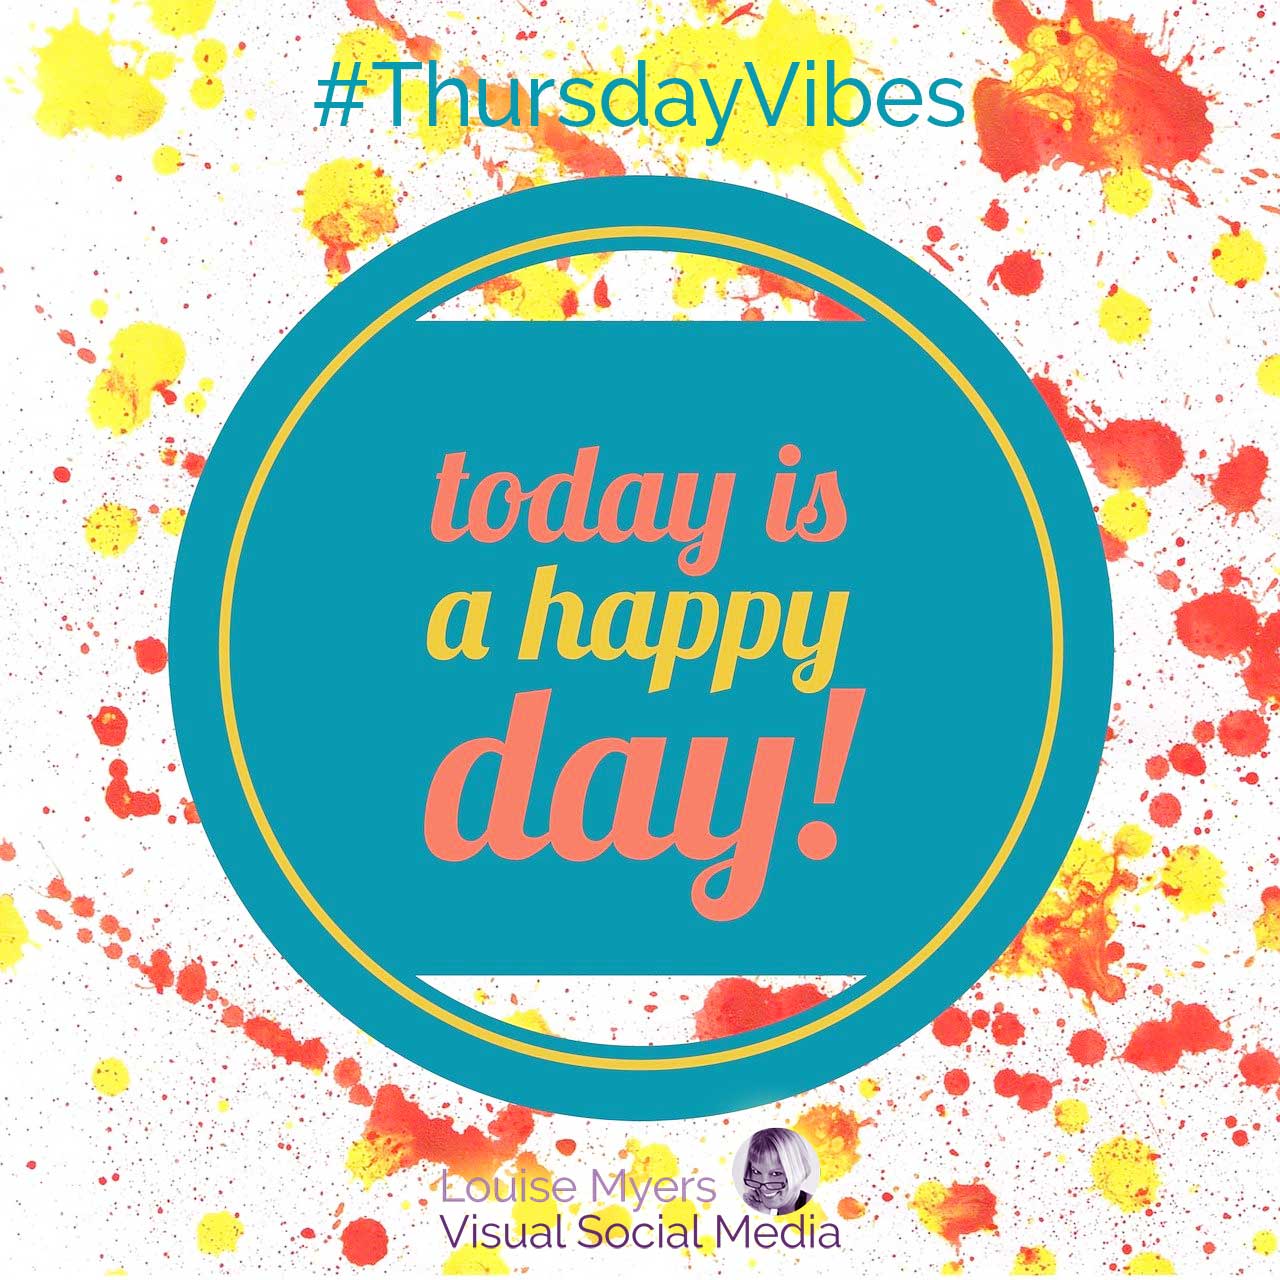 splashes of red and yellow with turquoise circle that says today is a happy day and hashtag thursday vibes.